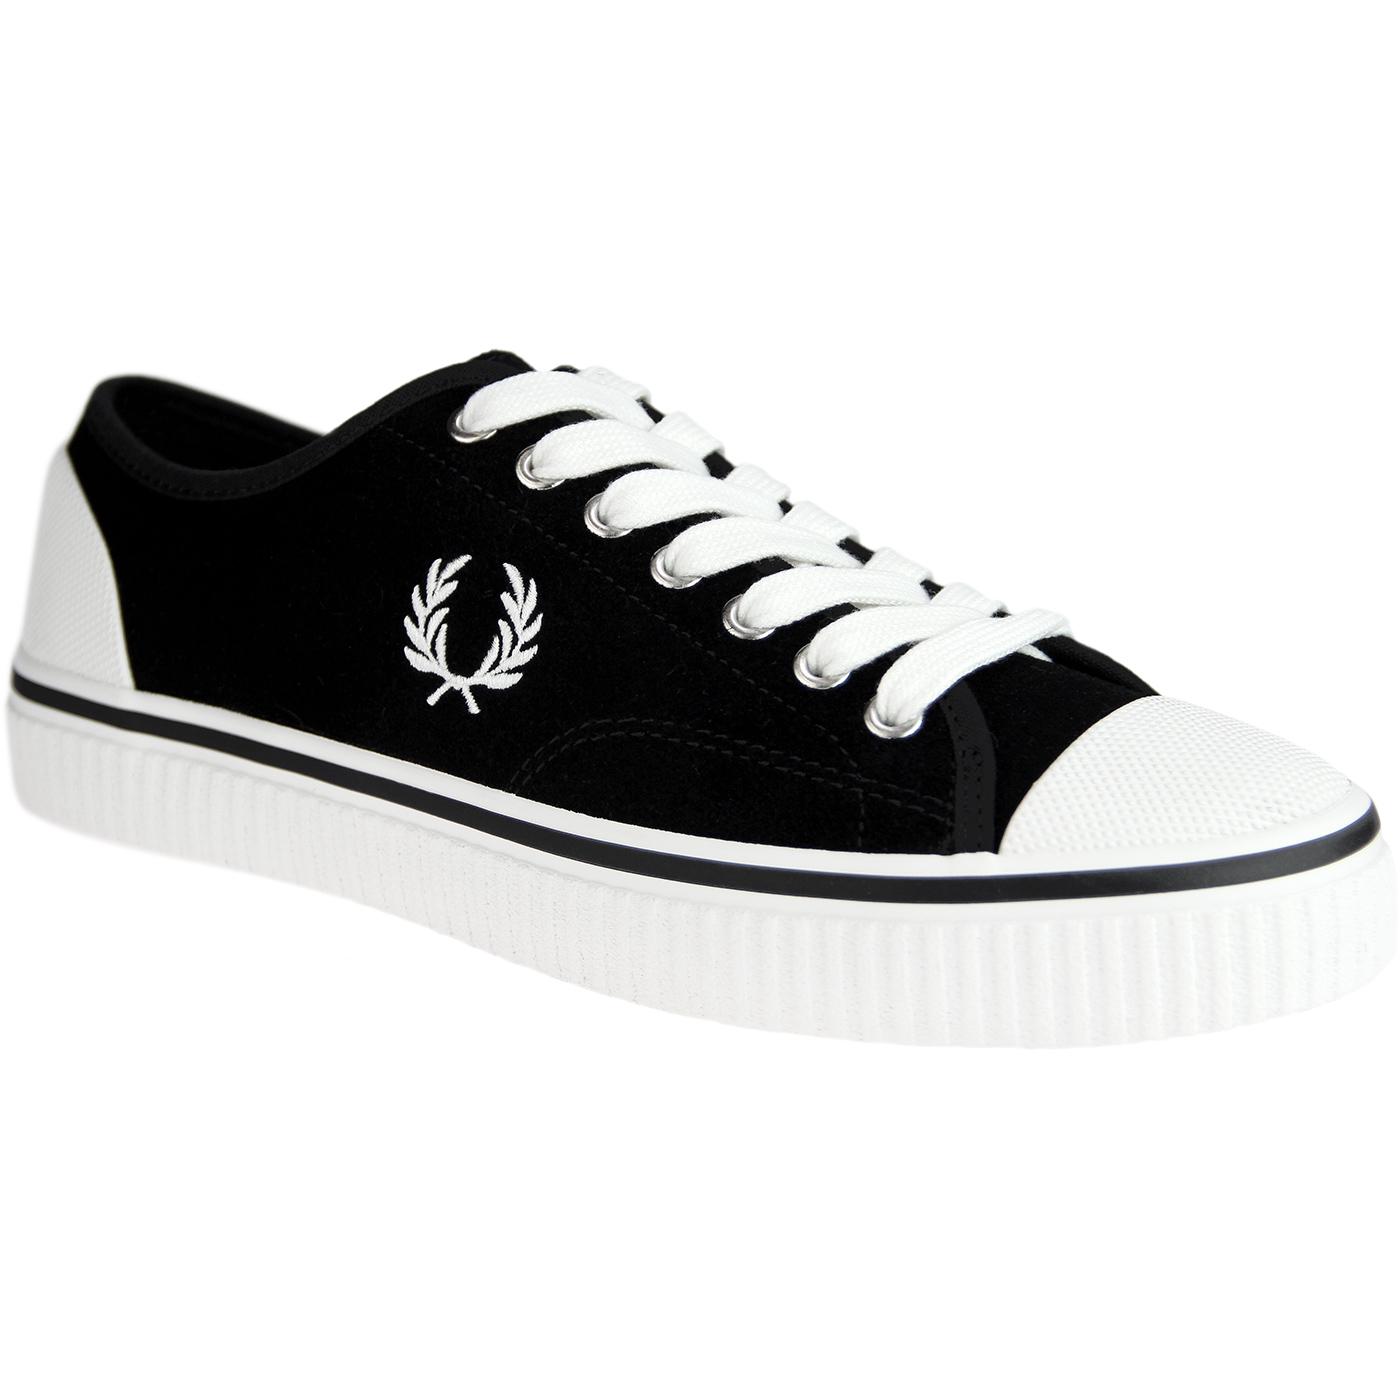 Hughes FRED PERRY Retro Low Suede Trainers (Black)